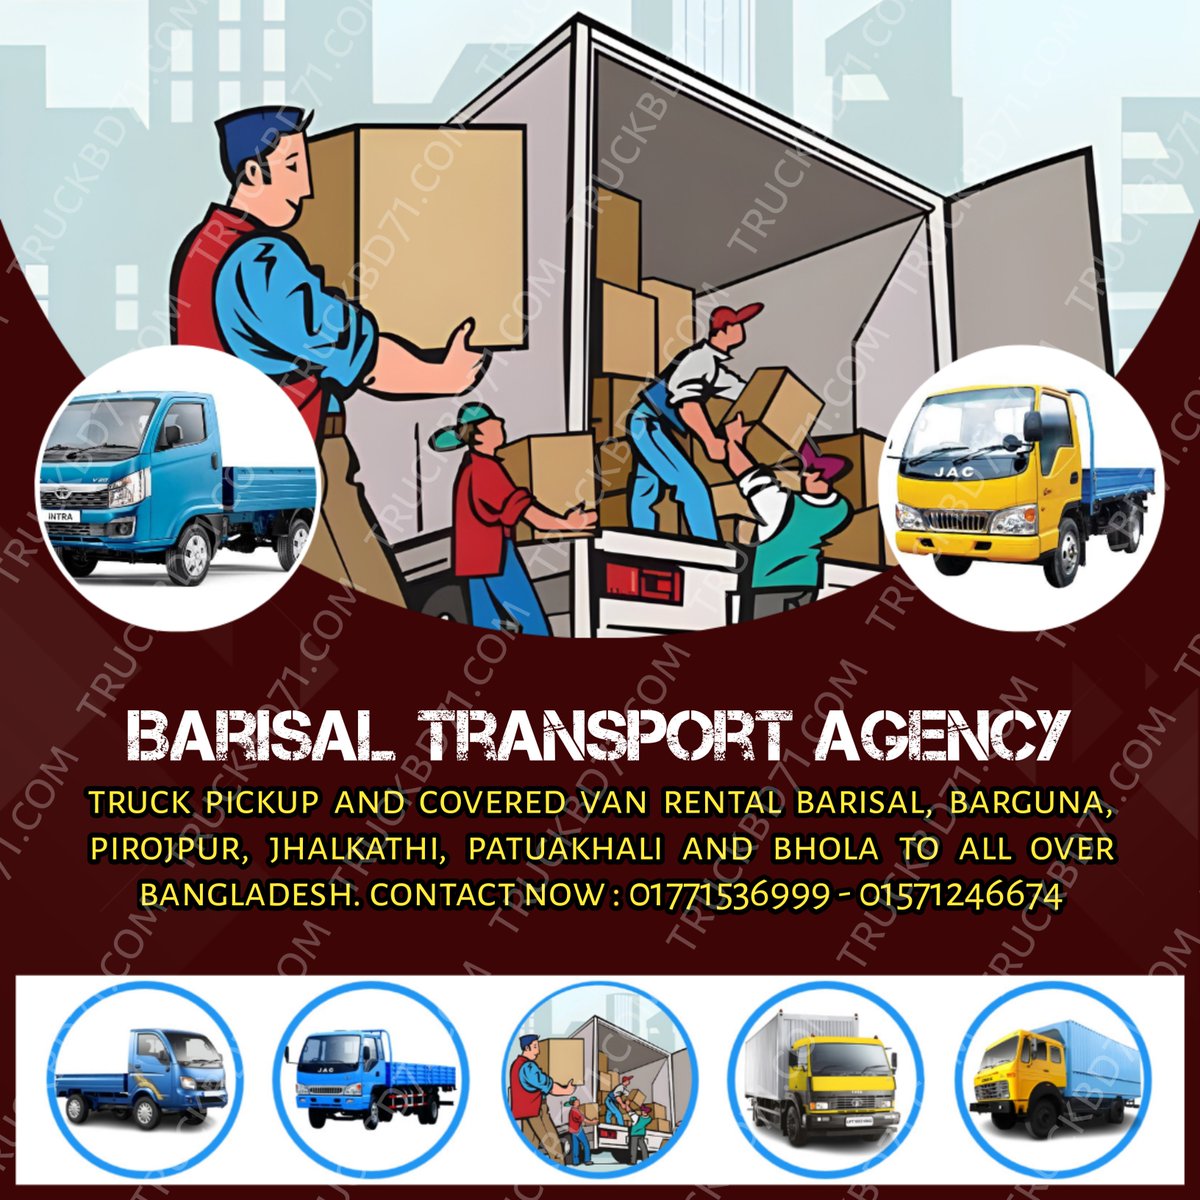 Truck Pickup Covered Van Rental In Barisal , Barguna, Jhalkathi, Pirojpur, Patuakhali, Bhola  for easy home office shifting services 01771536999.  Our company name is TRUCKBD71 we are faithfully engaged in home and office shifting services for more than a century.